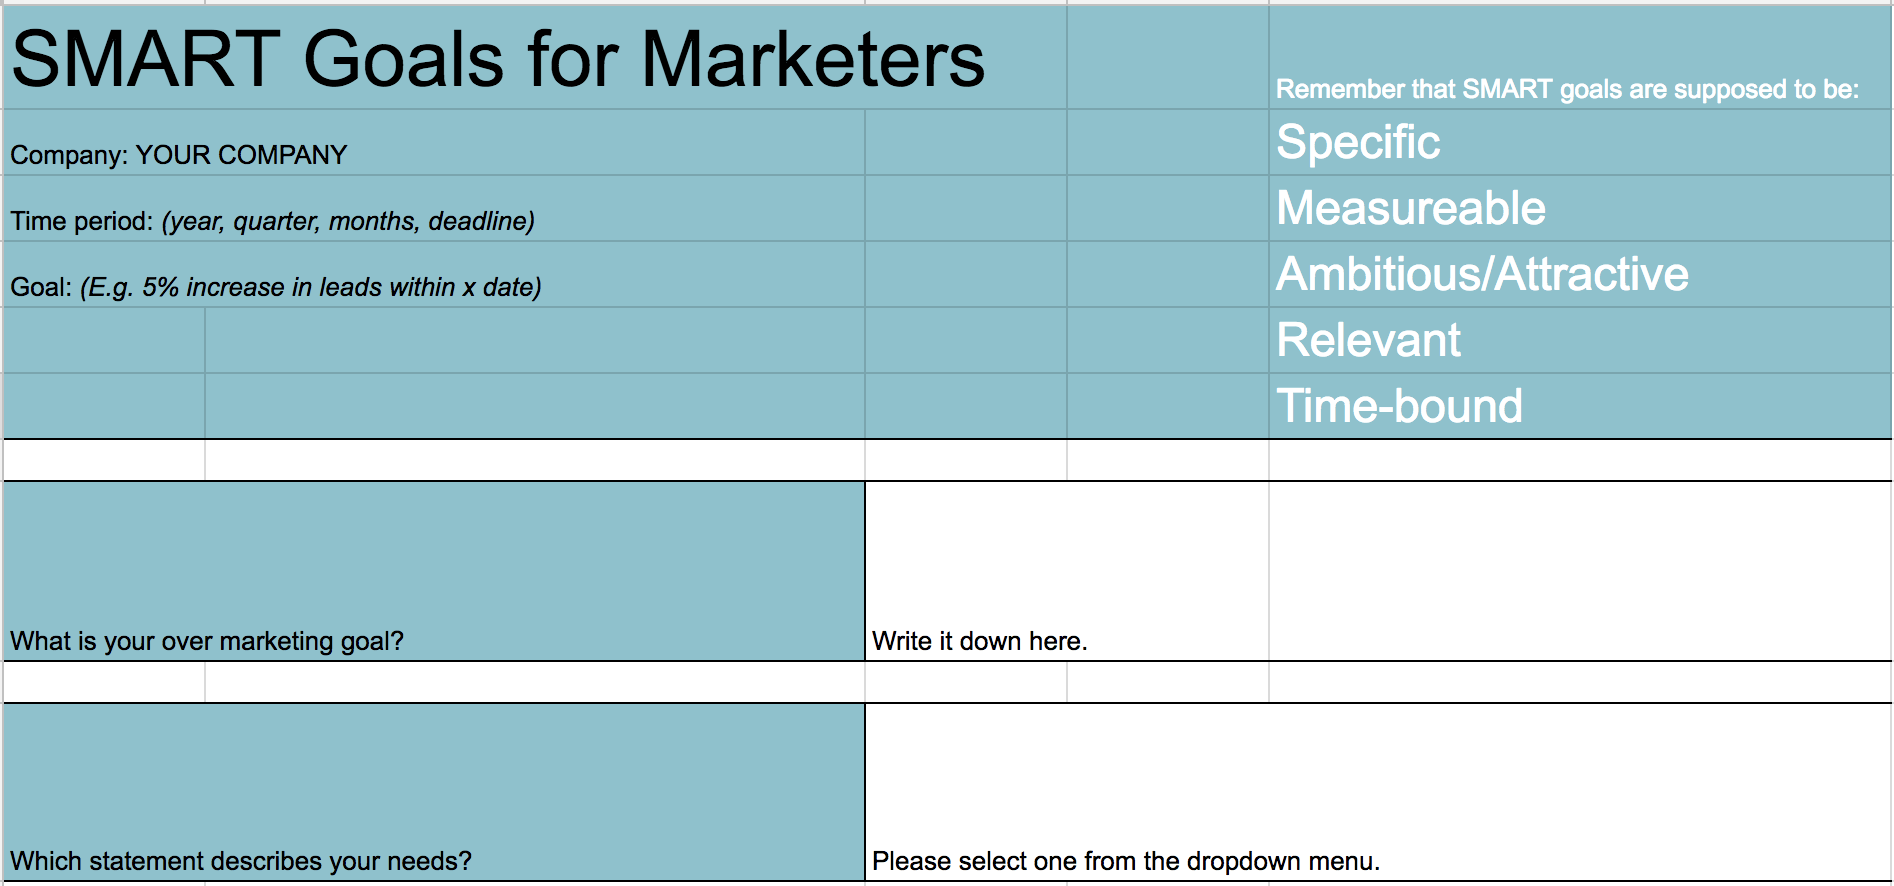 Smart goals for marketers